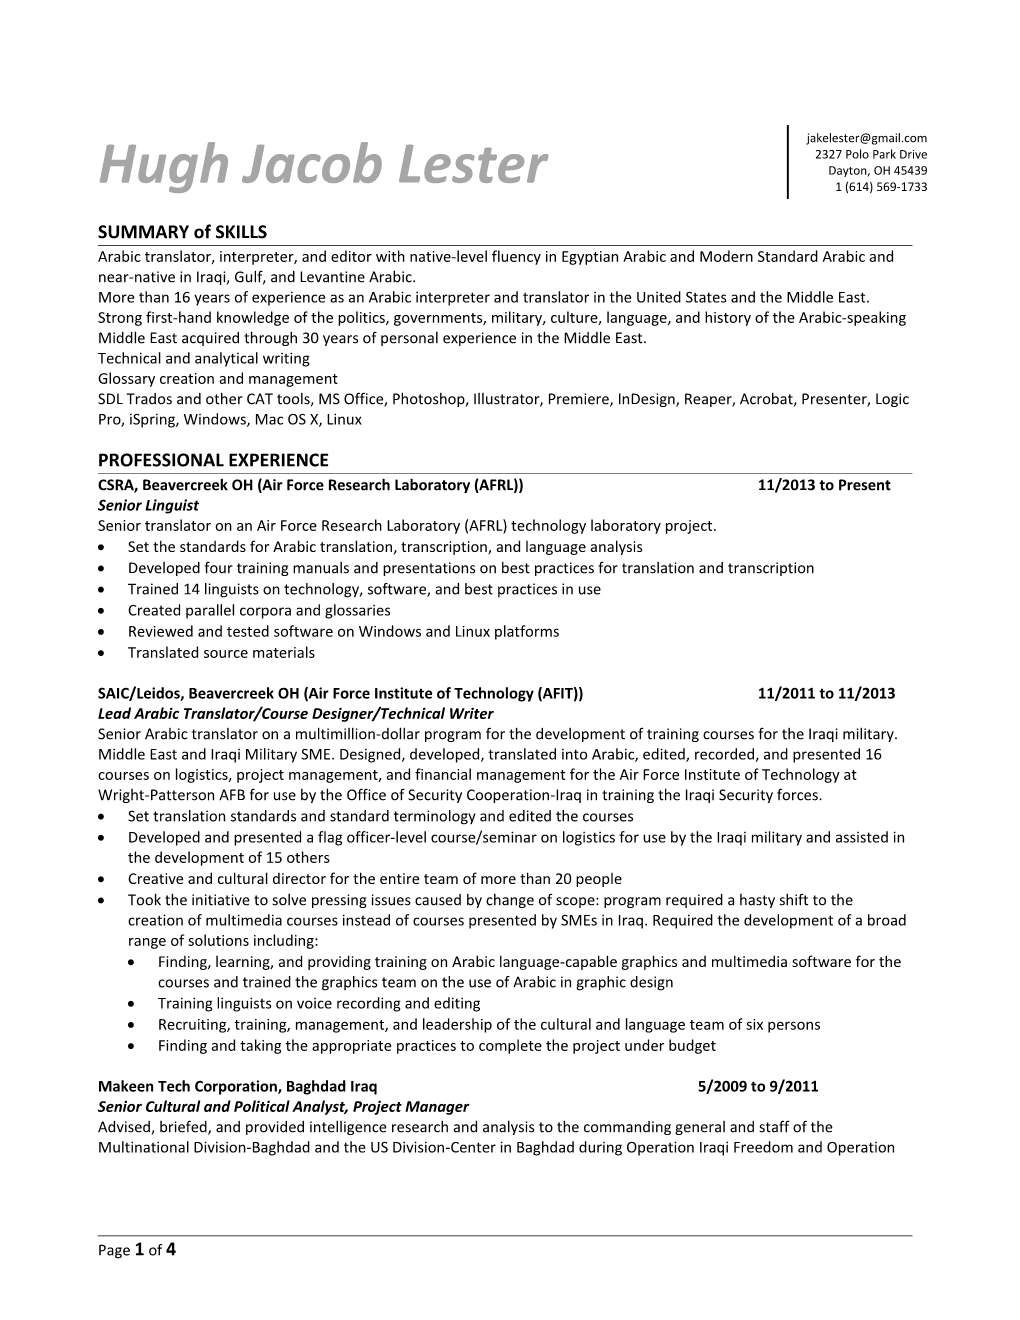 Human Resources: Redeployment: Sample Resume